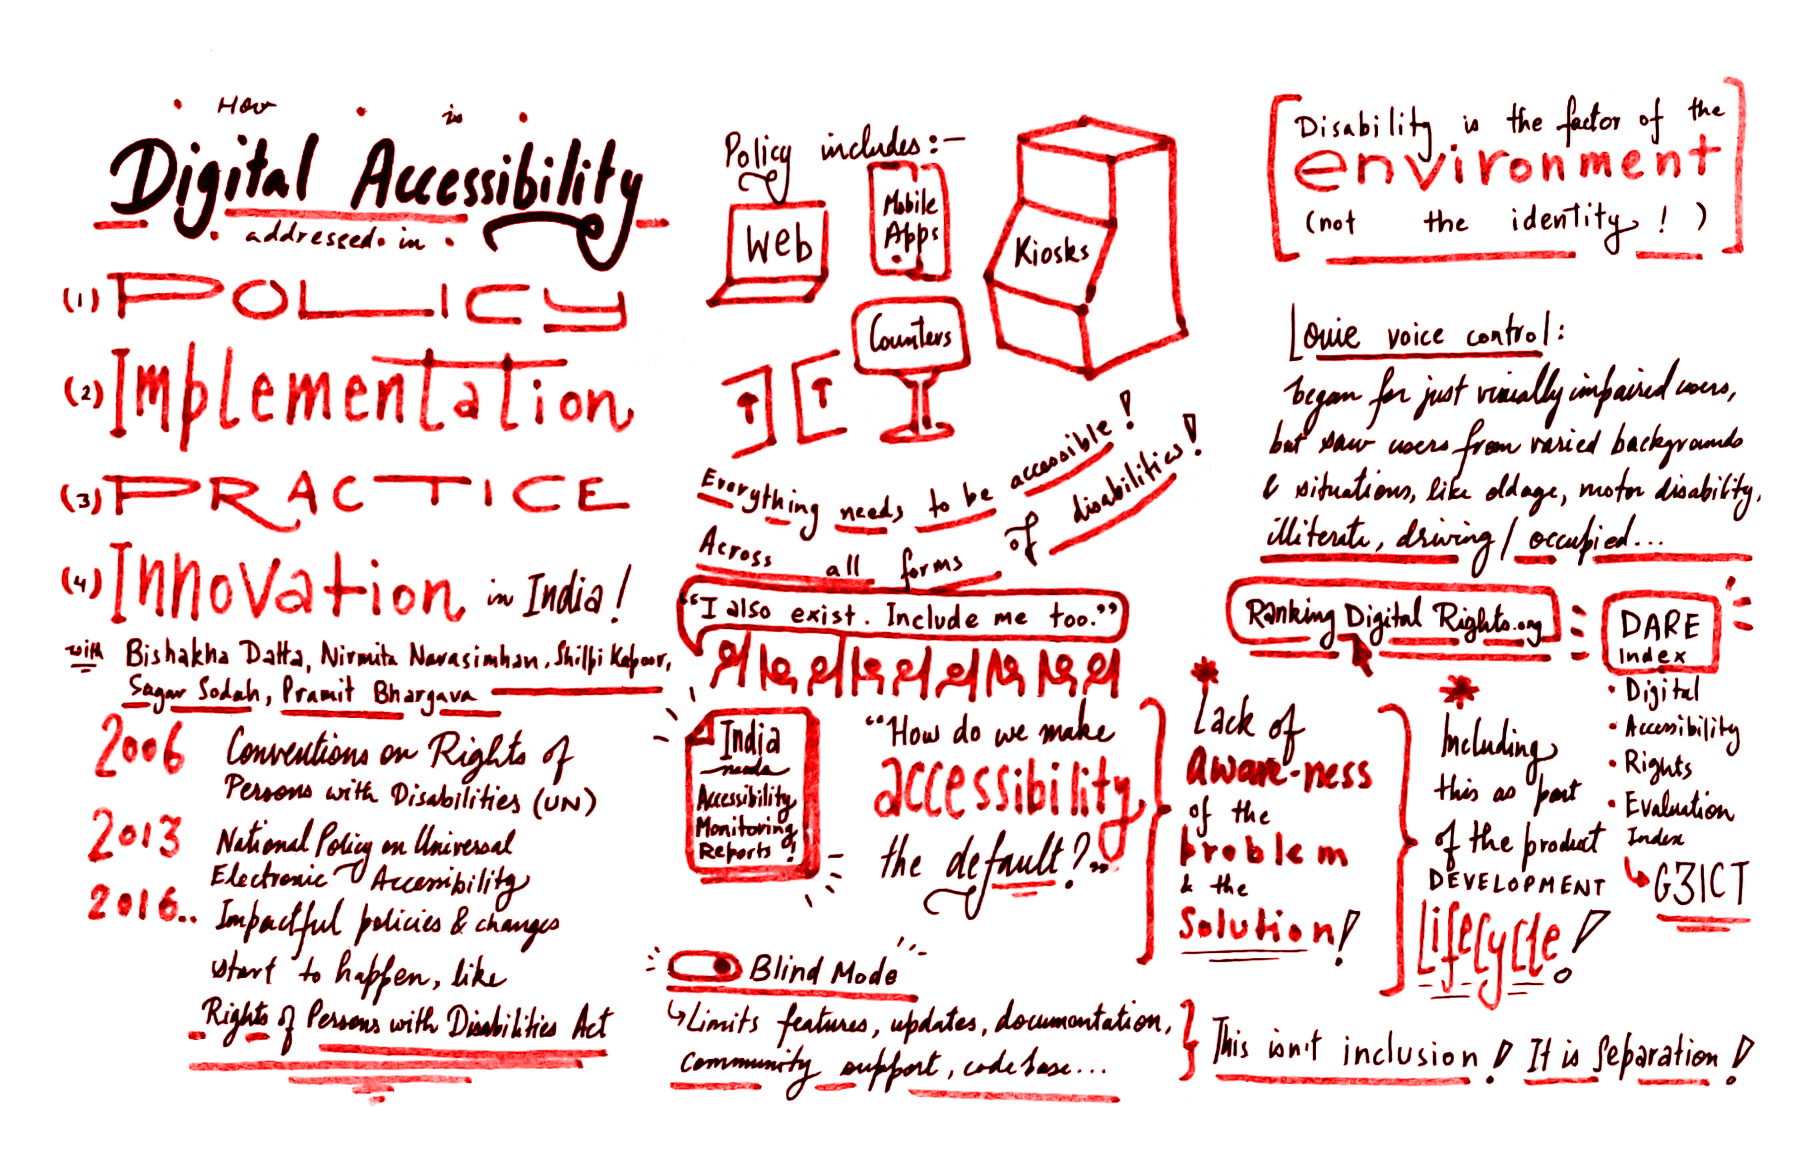 Sketchnote of Panel on different laws for digital accessibility, and a call for making accessibility a default consideration.